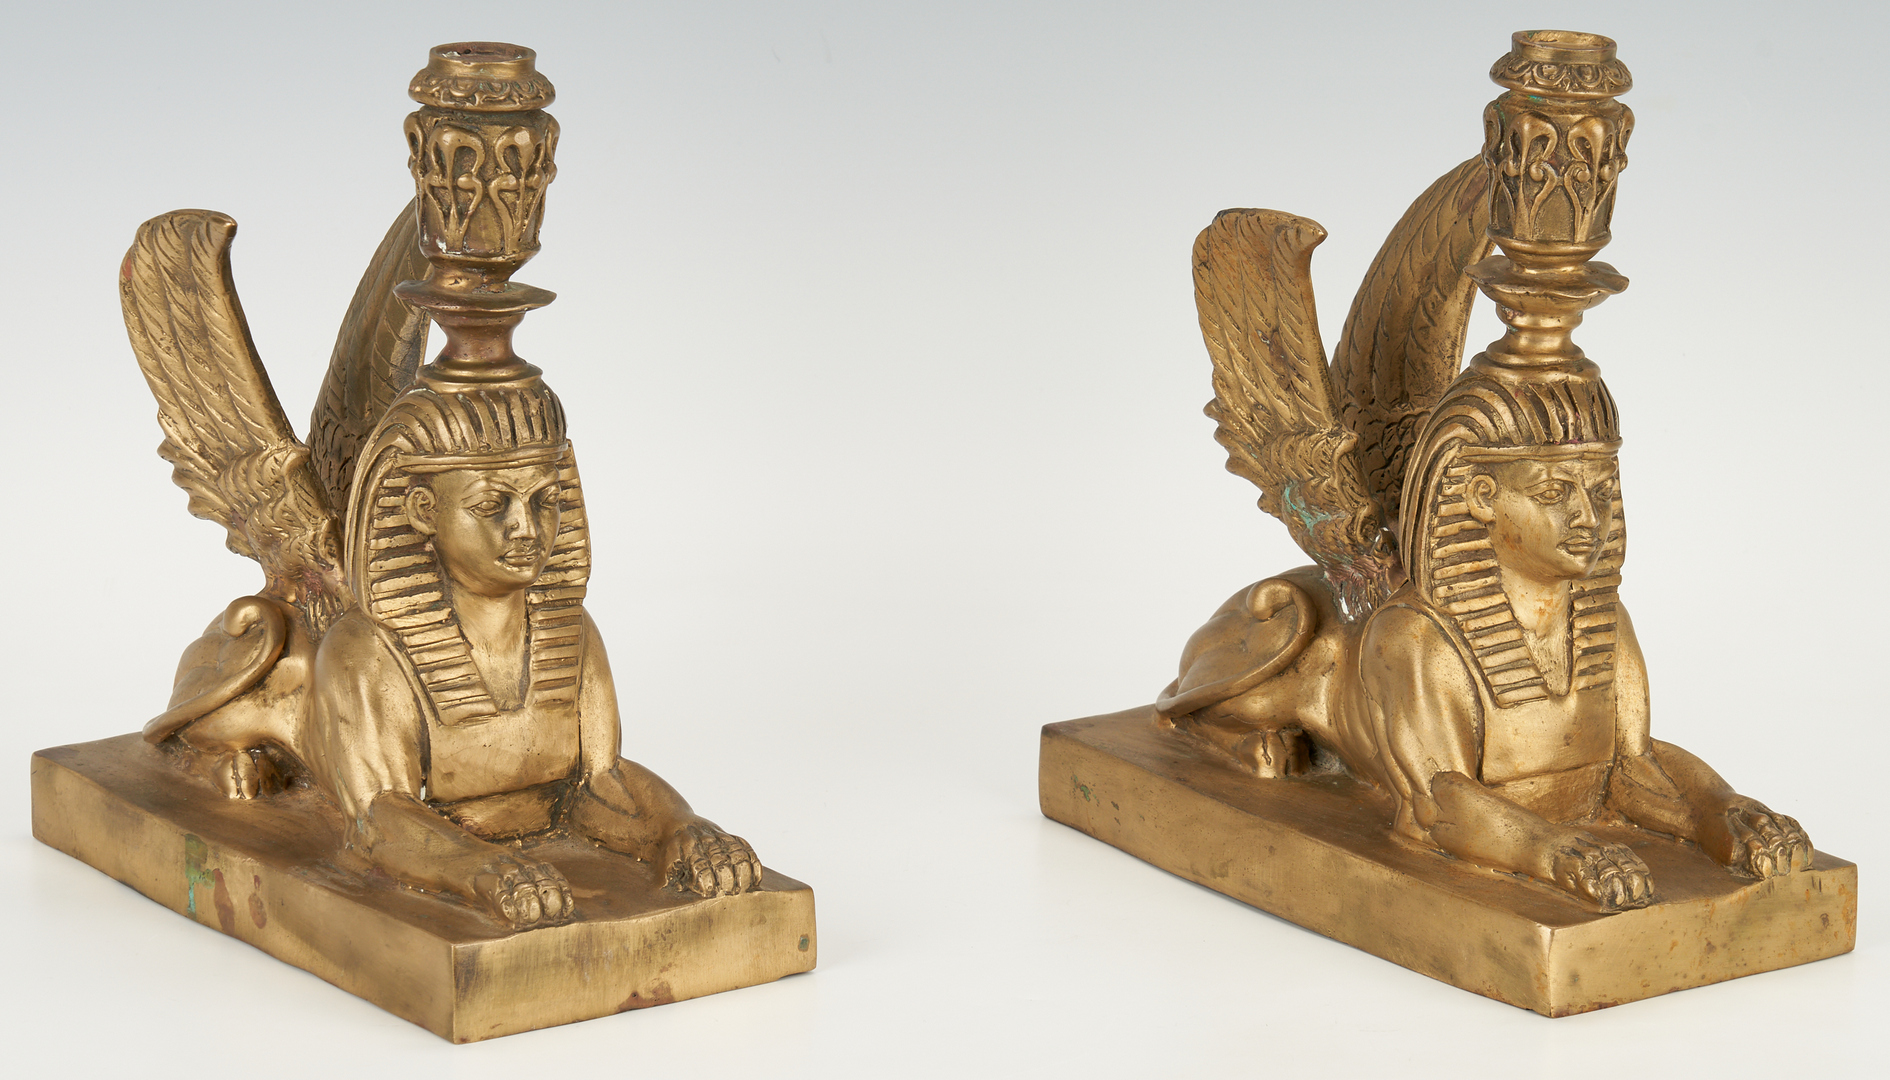 Lot 433: 5 Egyptian Revival Style Desk Accessories, incl. Sphinxes